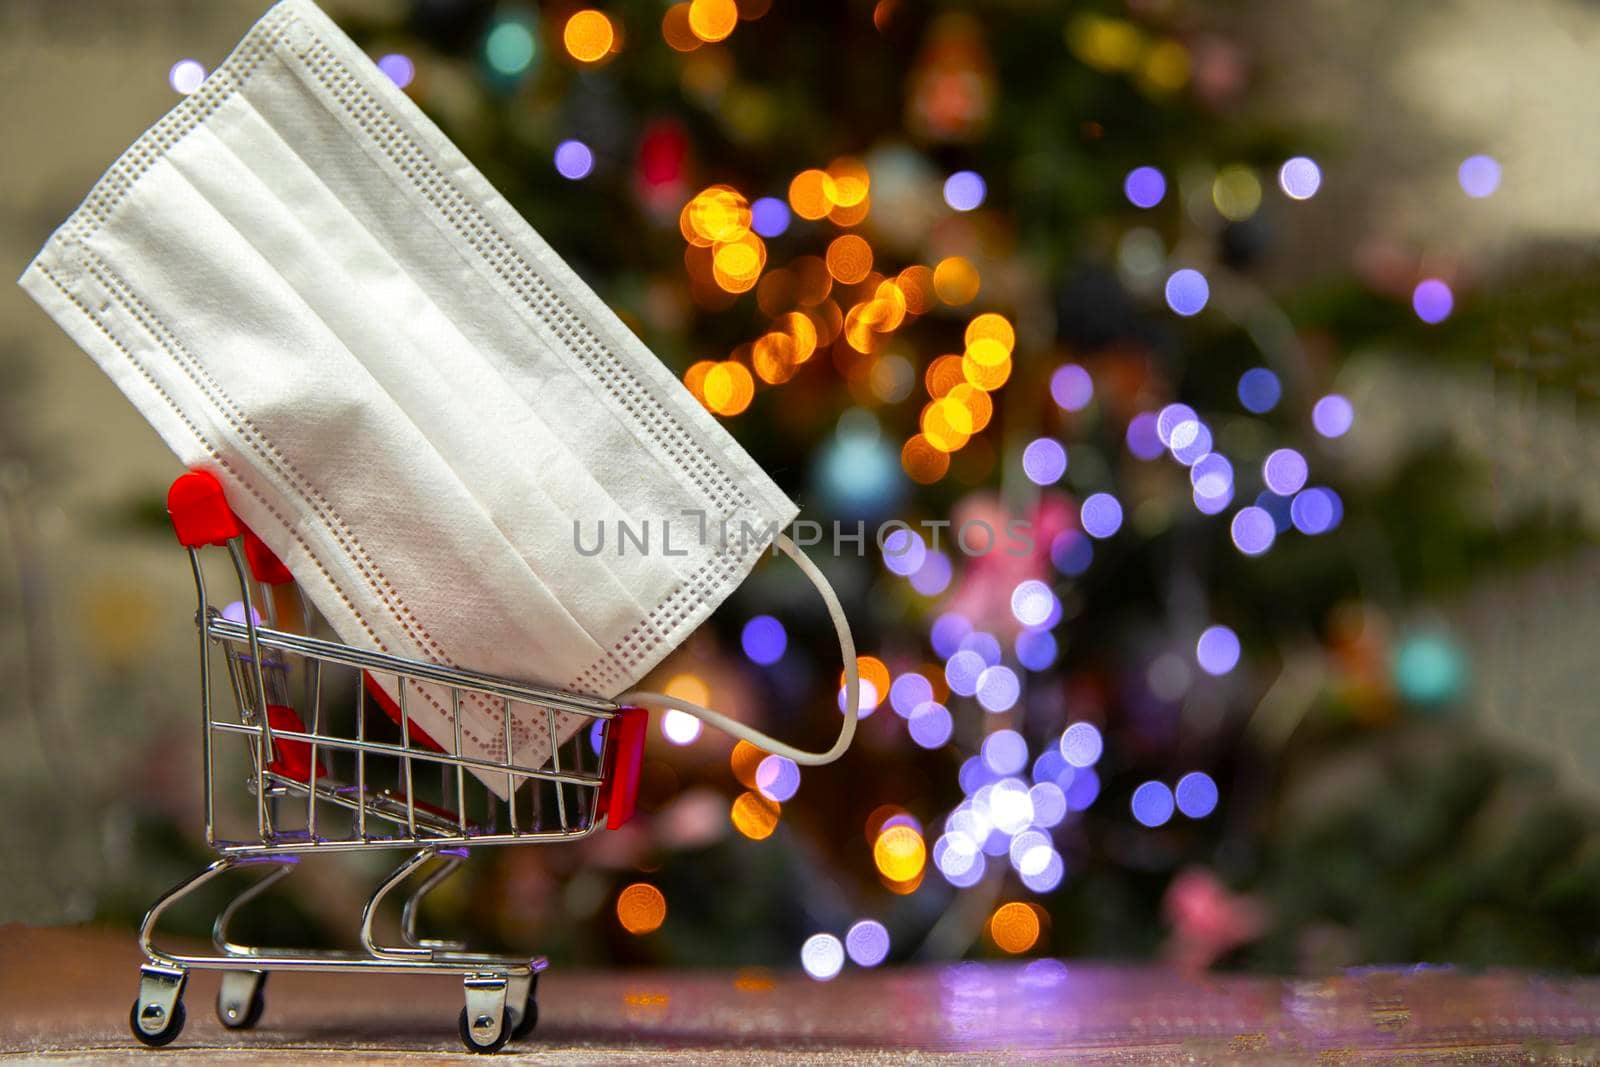 Protective safety mask in iron shopping basket near Christmas tree, Covid-19, coronavirus, holiday concept with copy space and bokeh lights background space for text